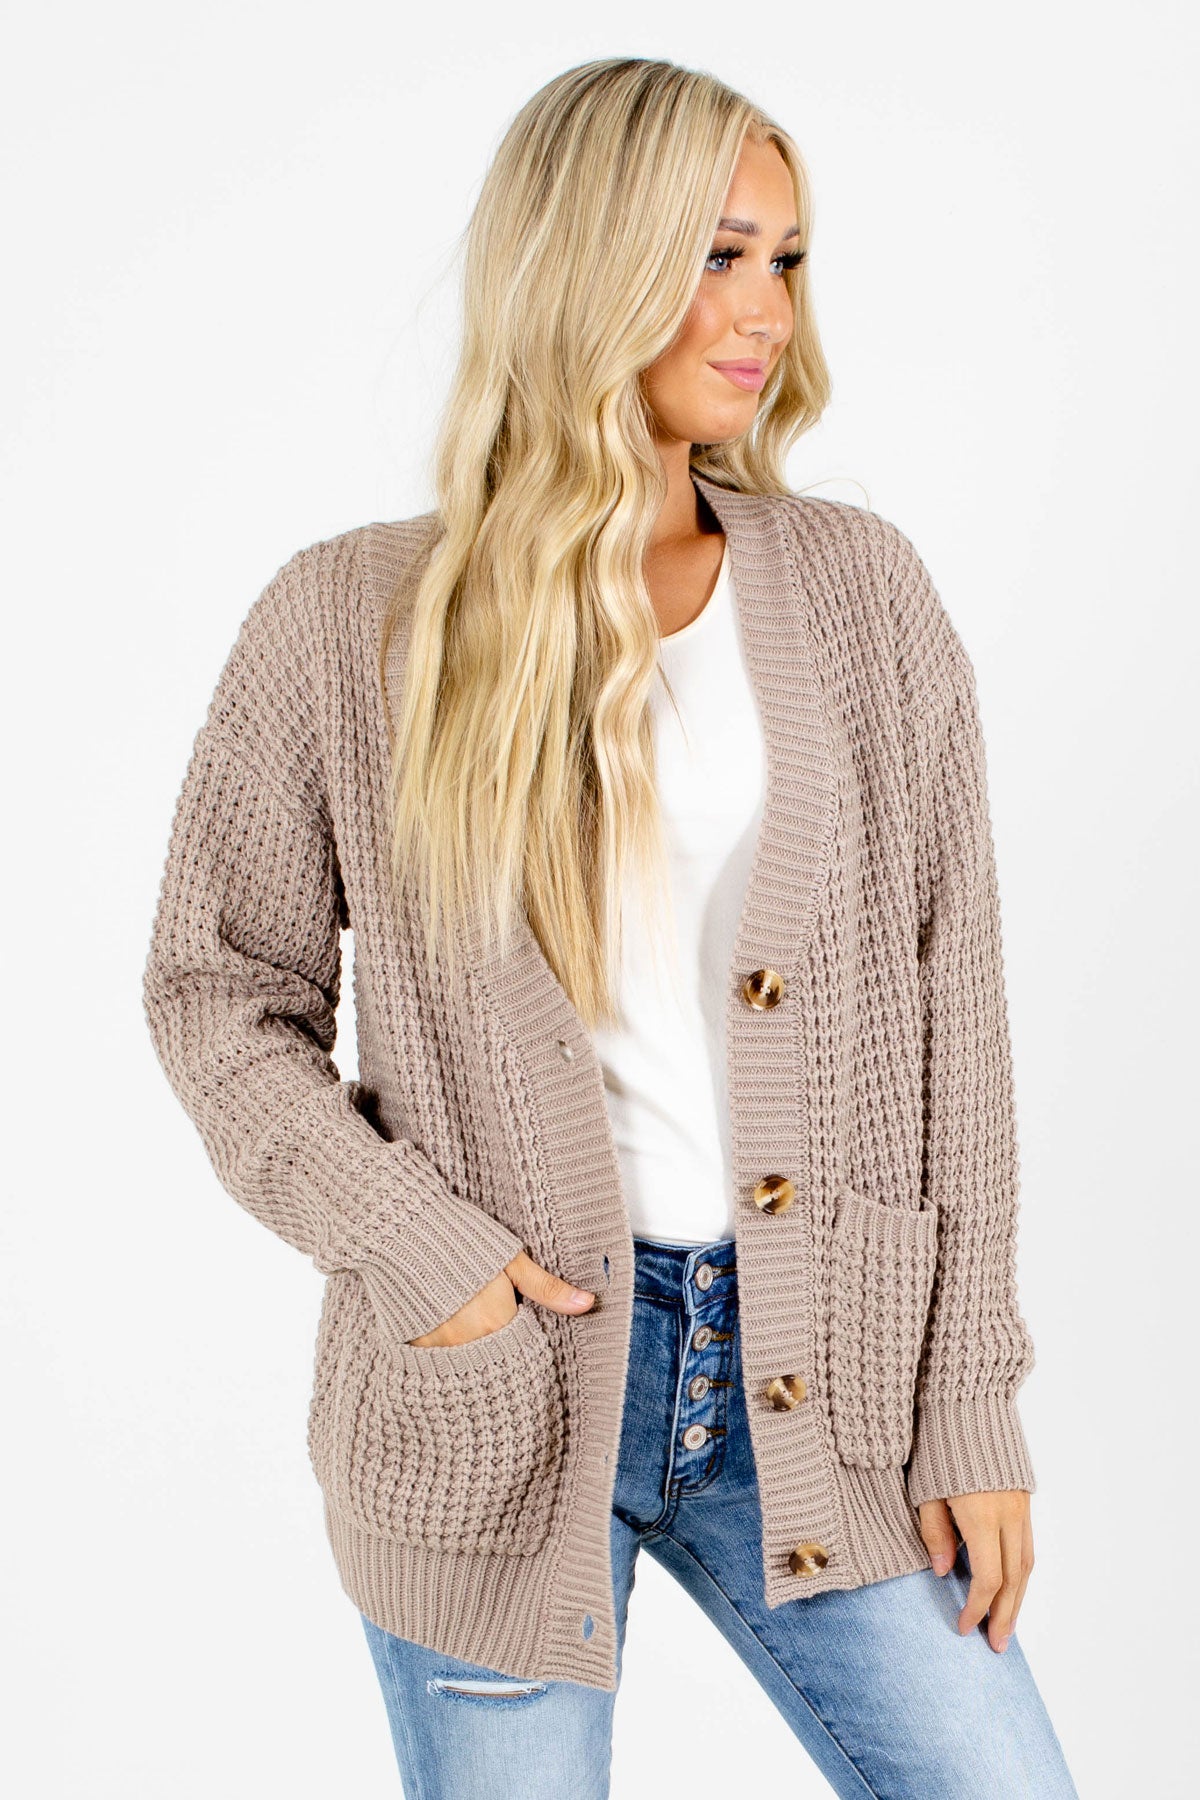 Beat the Odds Knit Cardigan | Boutique Cardigans for Women - Bella Ella ...